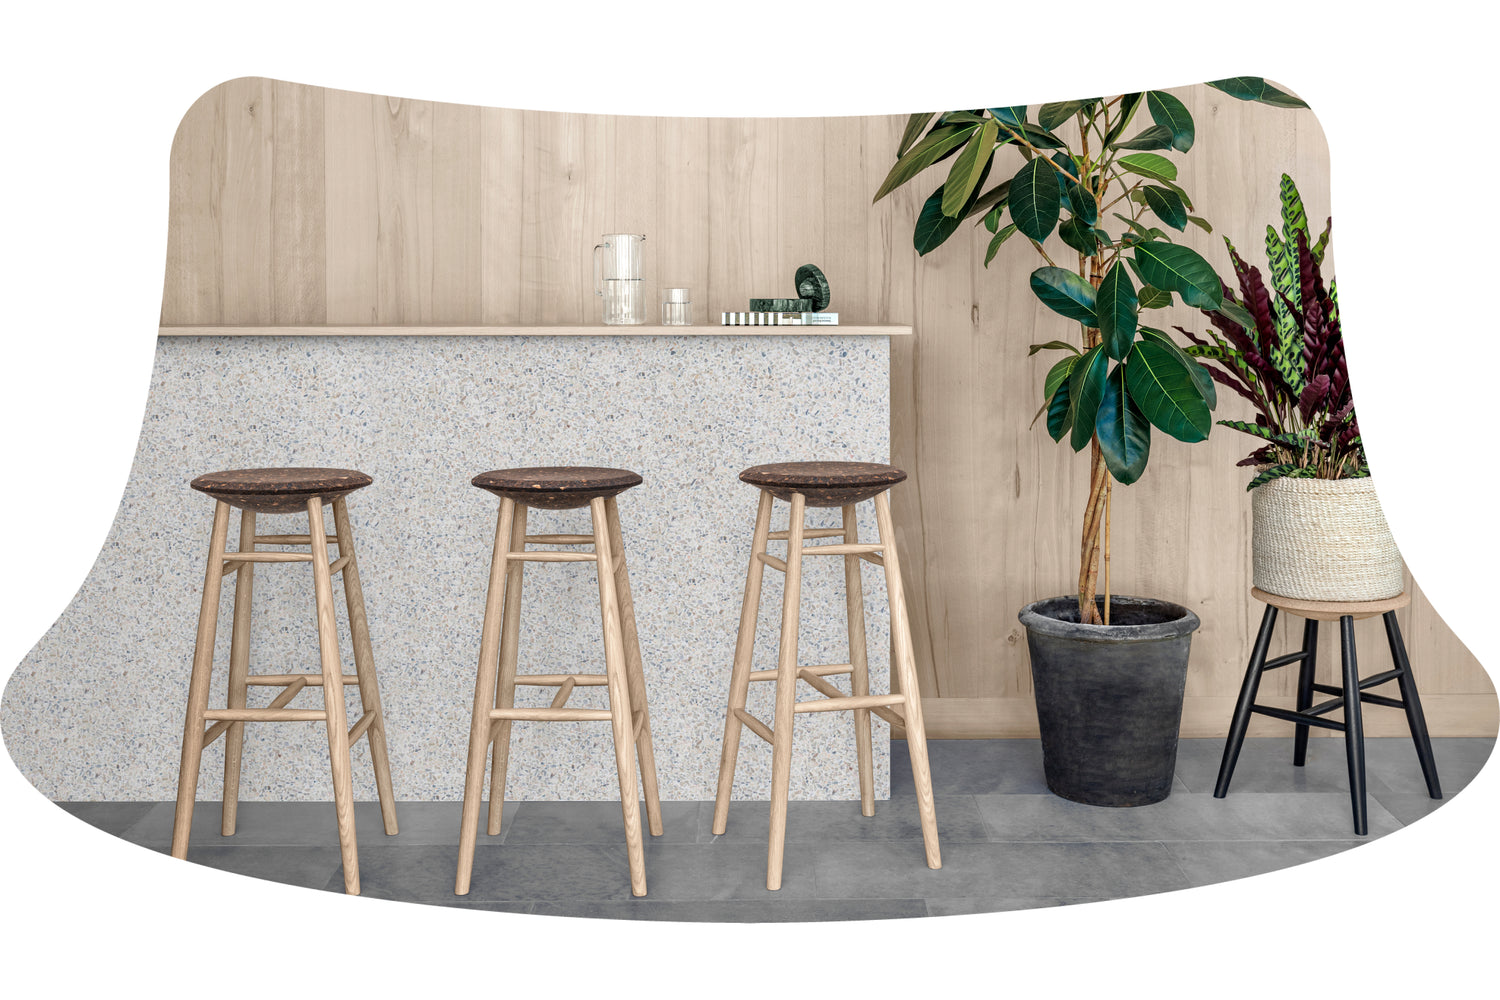 Hem - A lifestyle image featuring Drifted Bar Stools and Drifted Counter Stool.